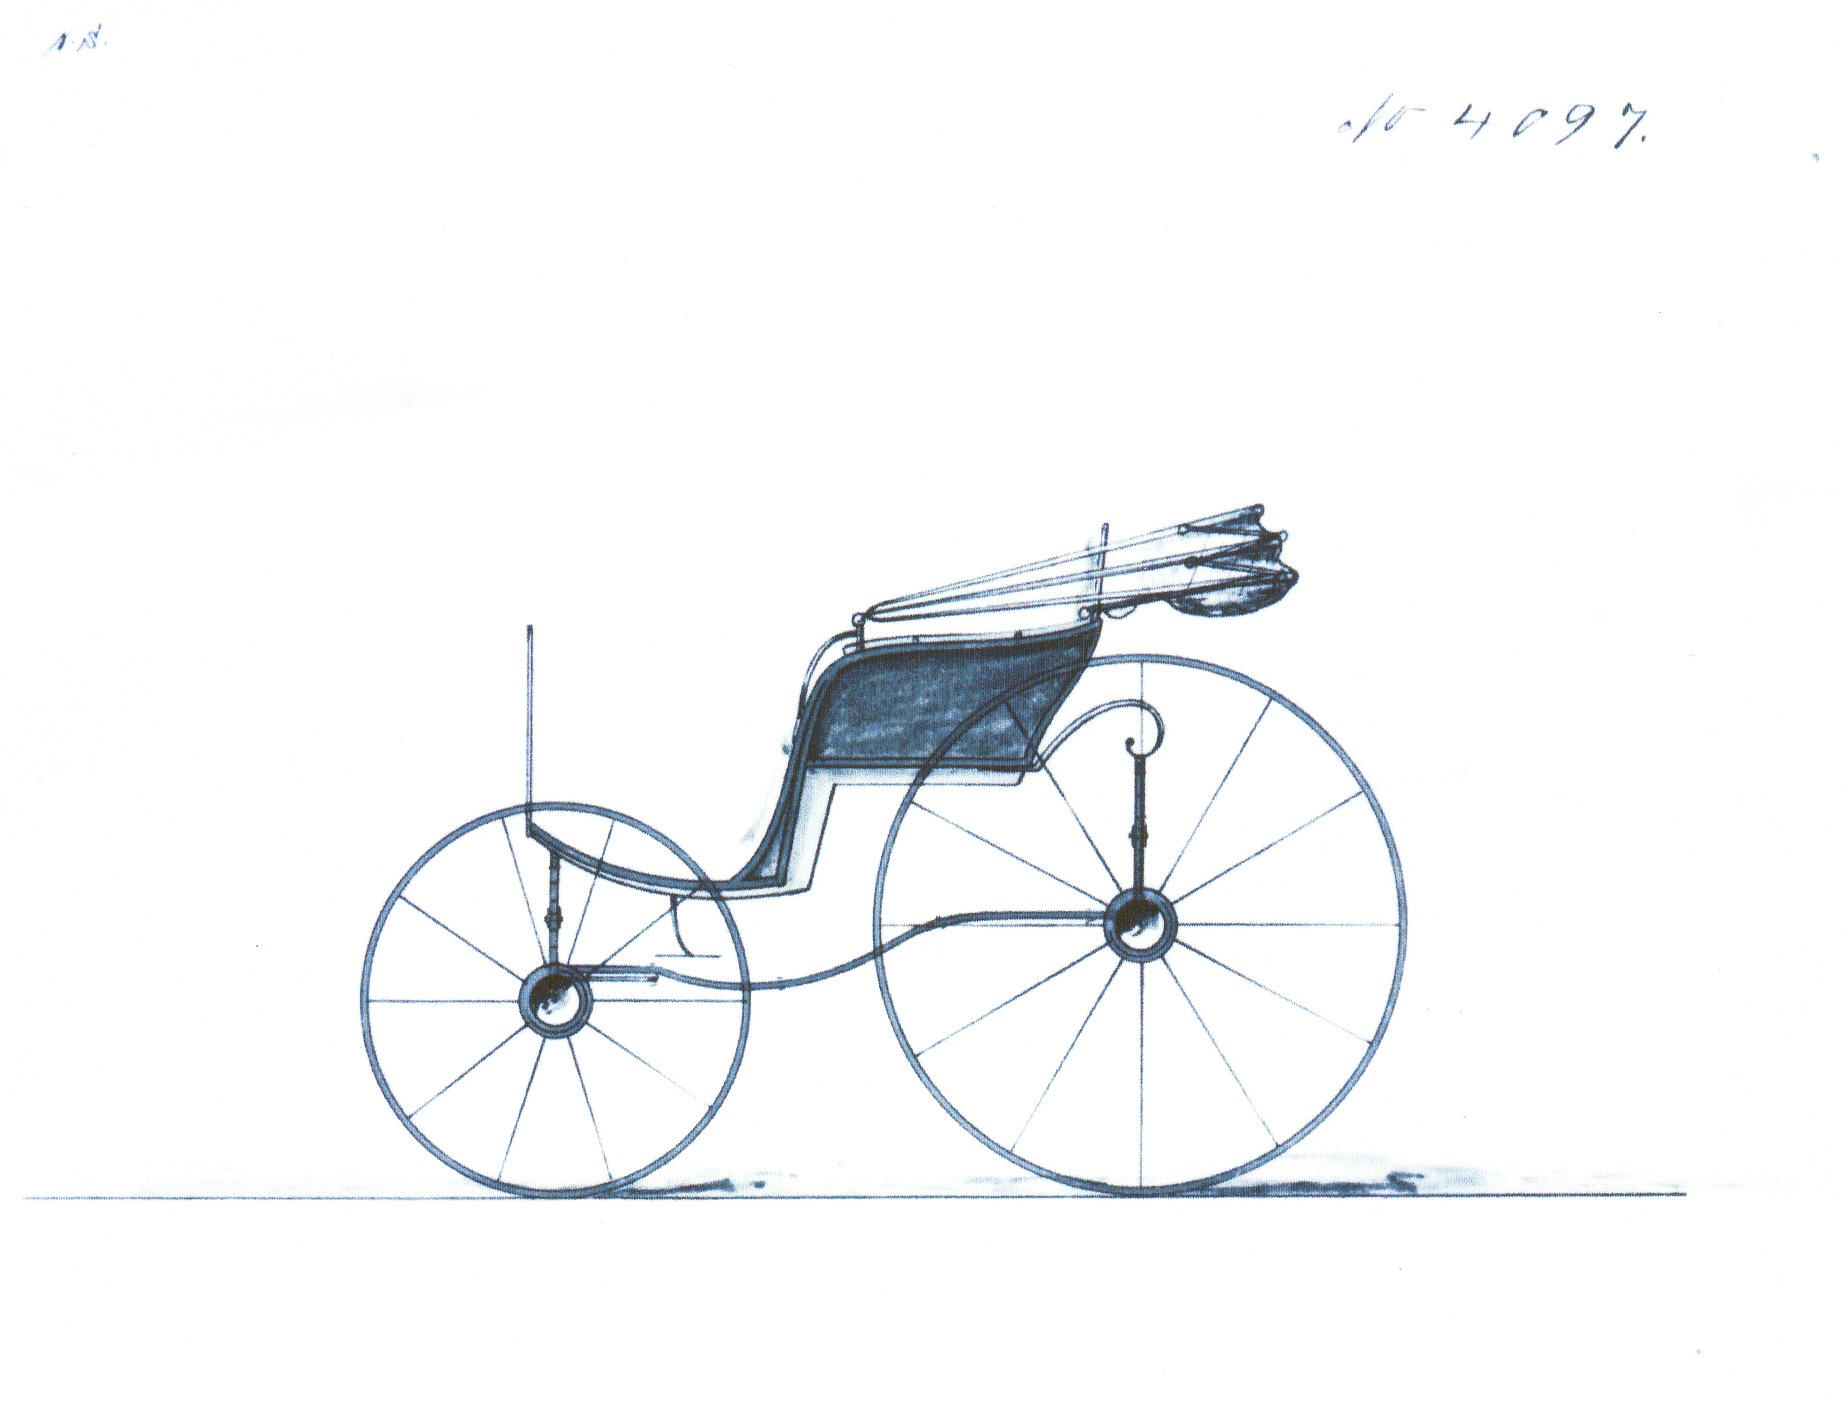 Sketch of a Brewster bell phaeton carriage that Sarah custom ordered with an upgraded suspension system allowing for a smooth ride over bumpy, unpaved carriage roads around Ringwood Manor. The drawing was a draft of the carriage that Sarah approved before any work began on building it.